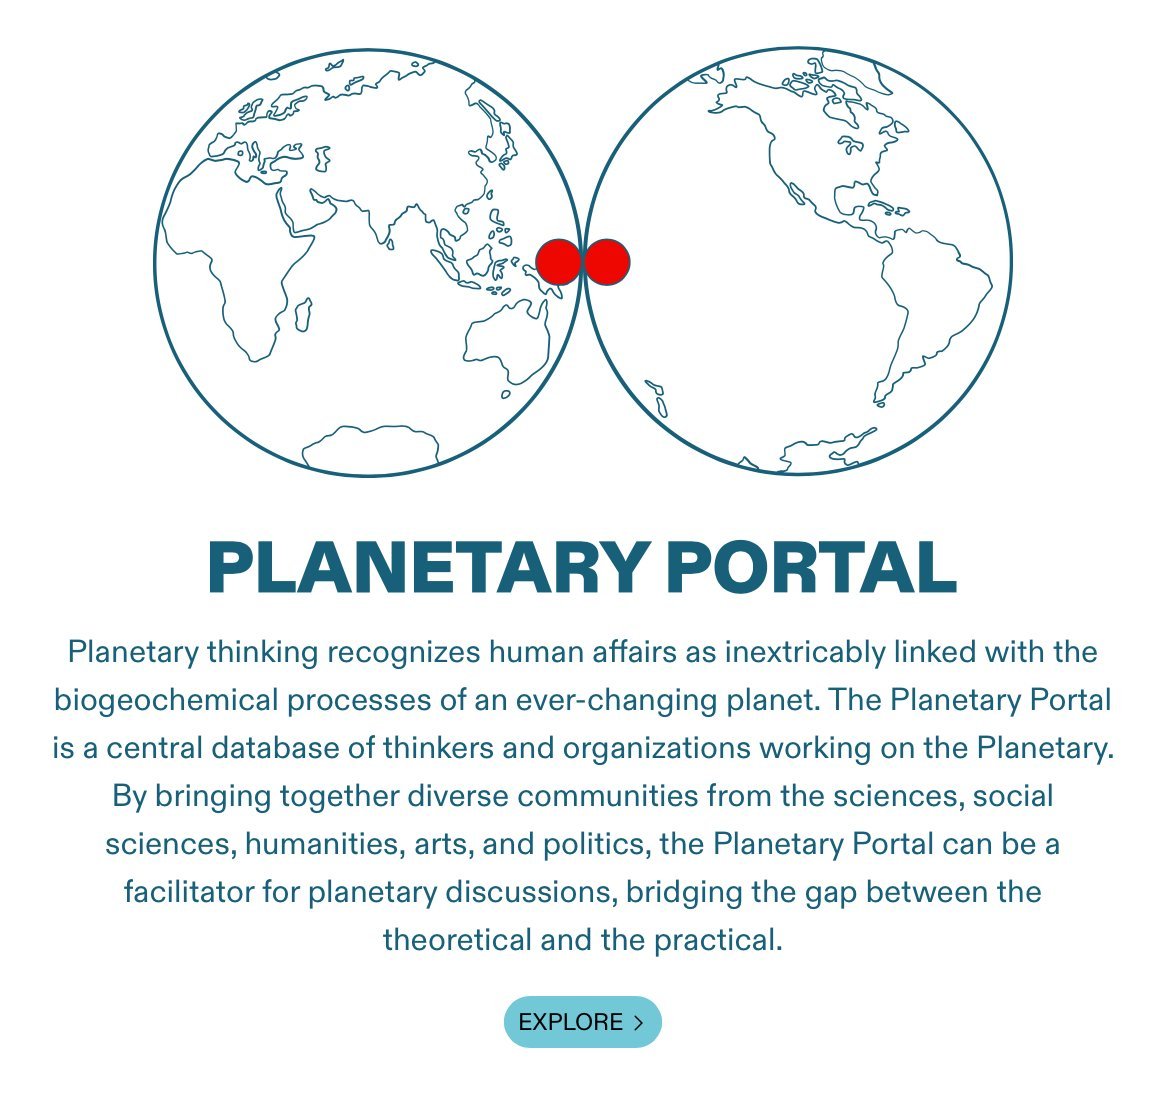 The Planetary Portal - a hub for institutions around the world that are working on or within a planetary framework planetaryportal.org via @FredericHanusch cc @indy_johar @AndreaSiodmok